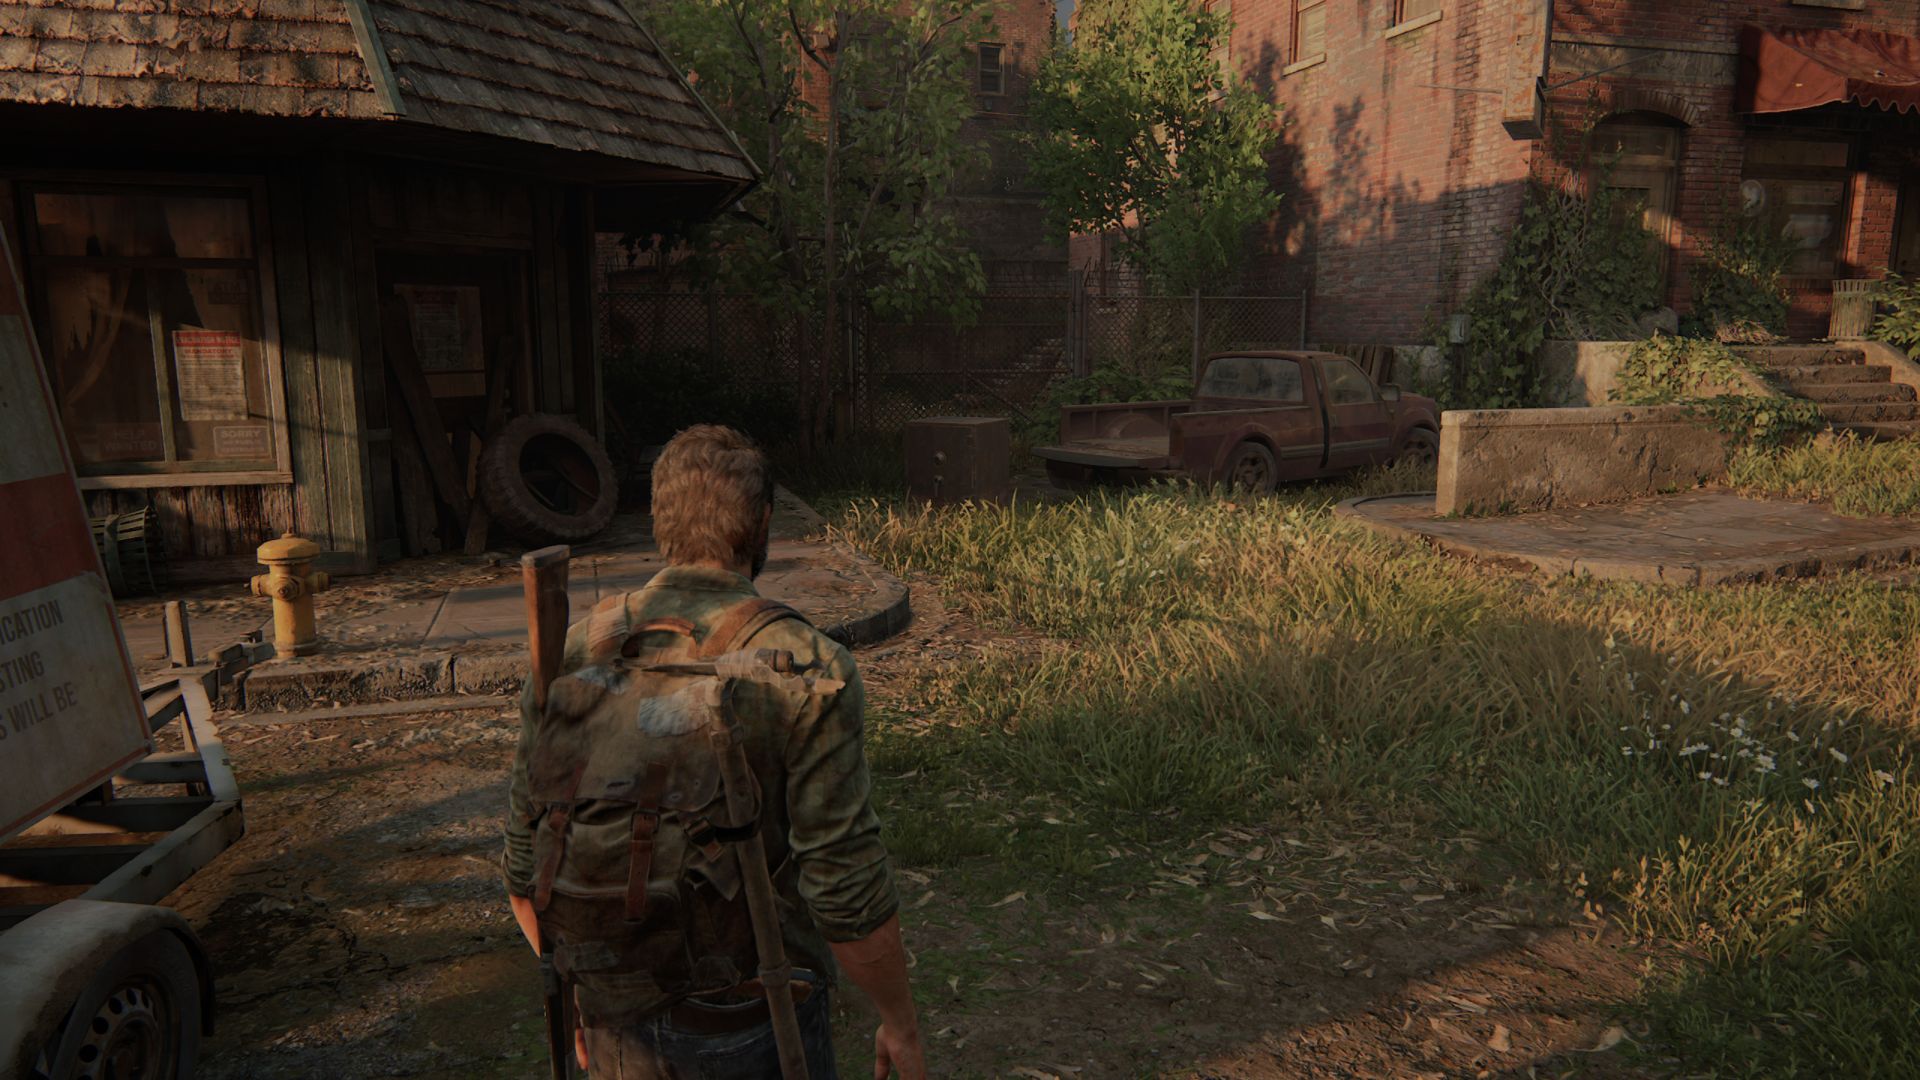 The Last of Us Part 1 Remake Bill's Town 収集可能な場所: 収集可能な場所を見ているジョエルを見ることができます